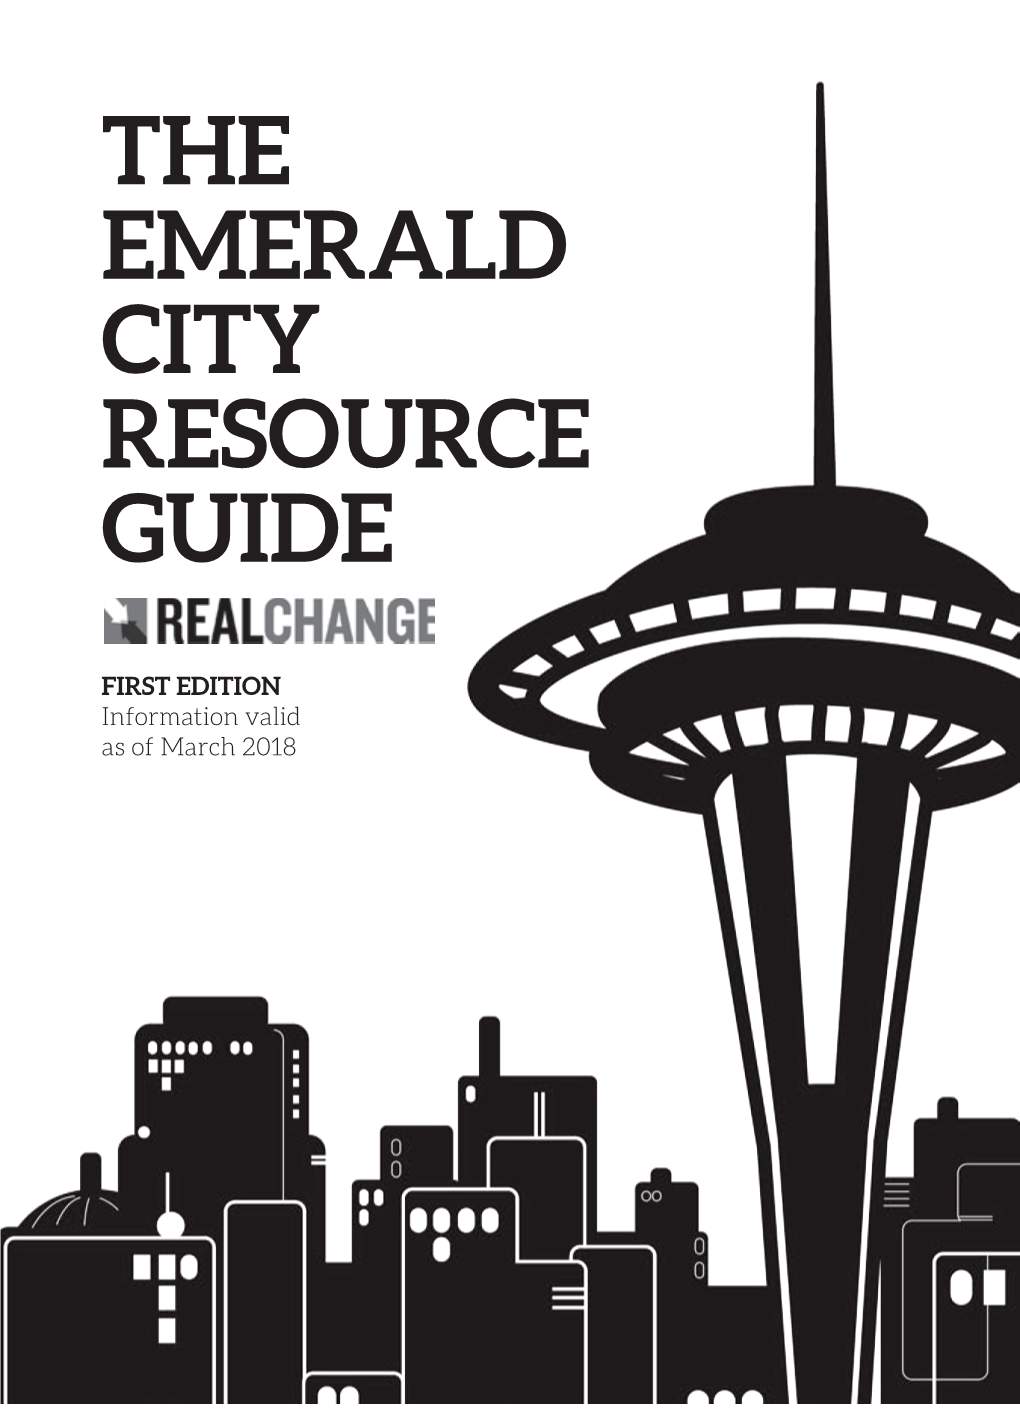 The Emerald City Resource Guide